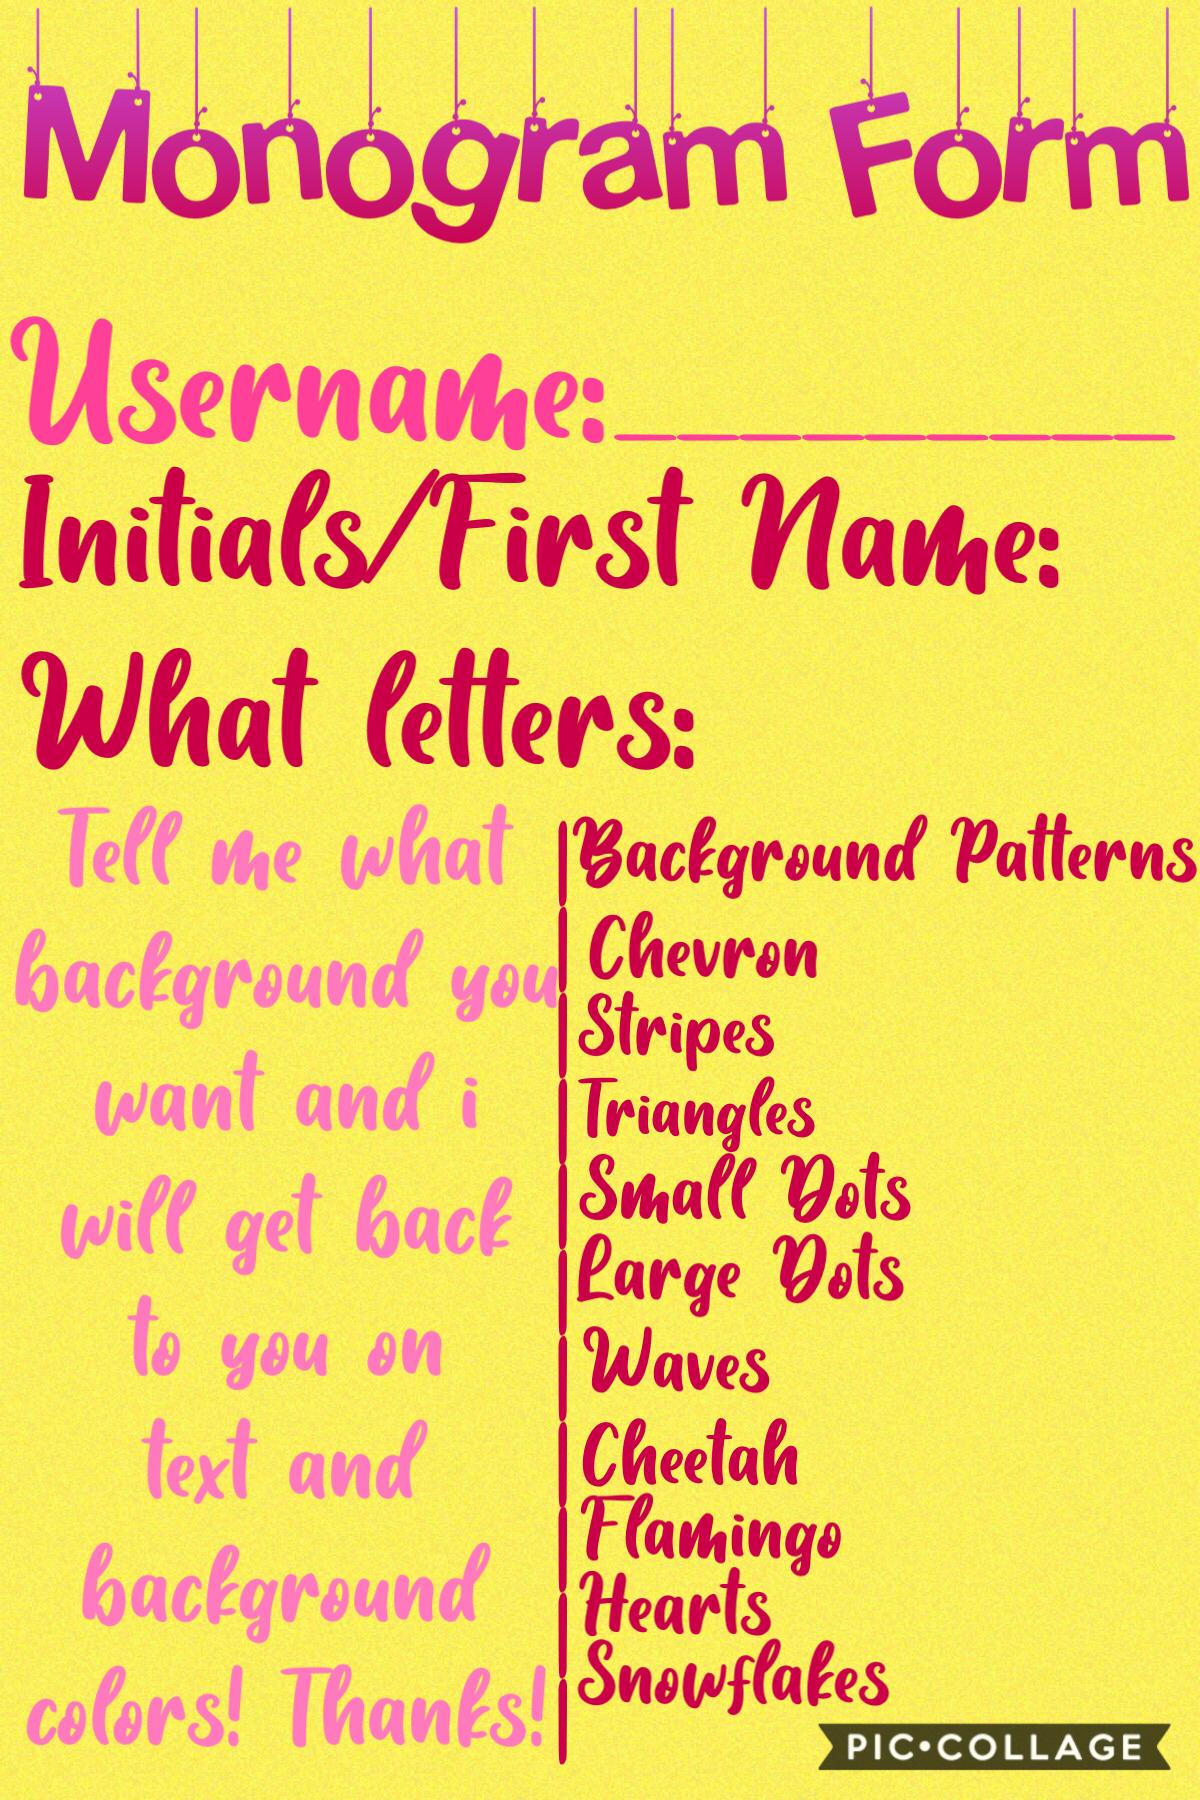 Requests for monograms! Please fill out the form. Pick your background and i will then get back to you on what colors are available in my monogram app without paying! Thanks for your support! Love you all. 